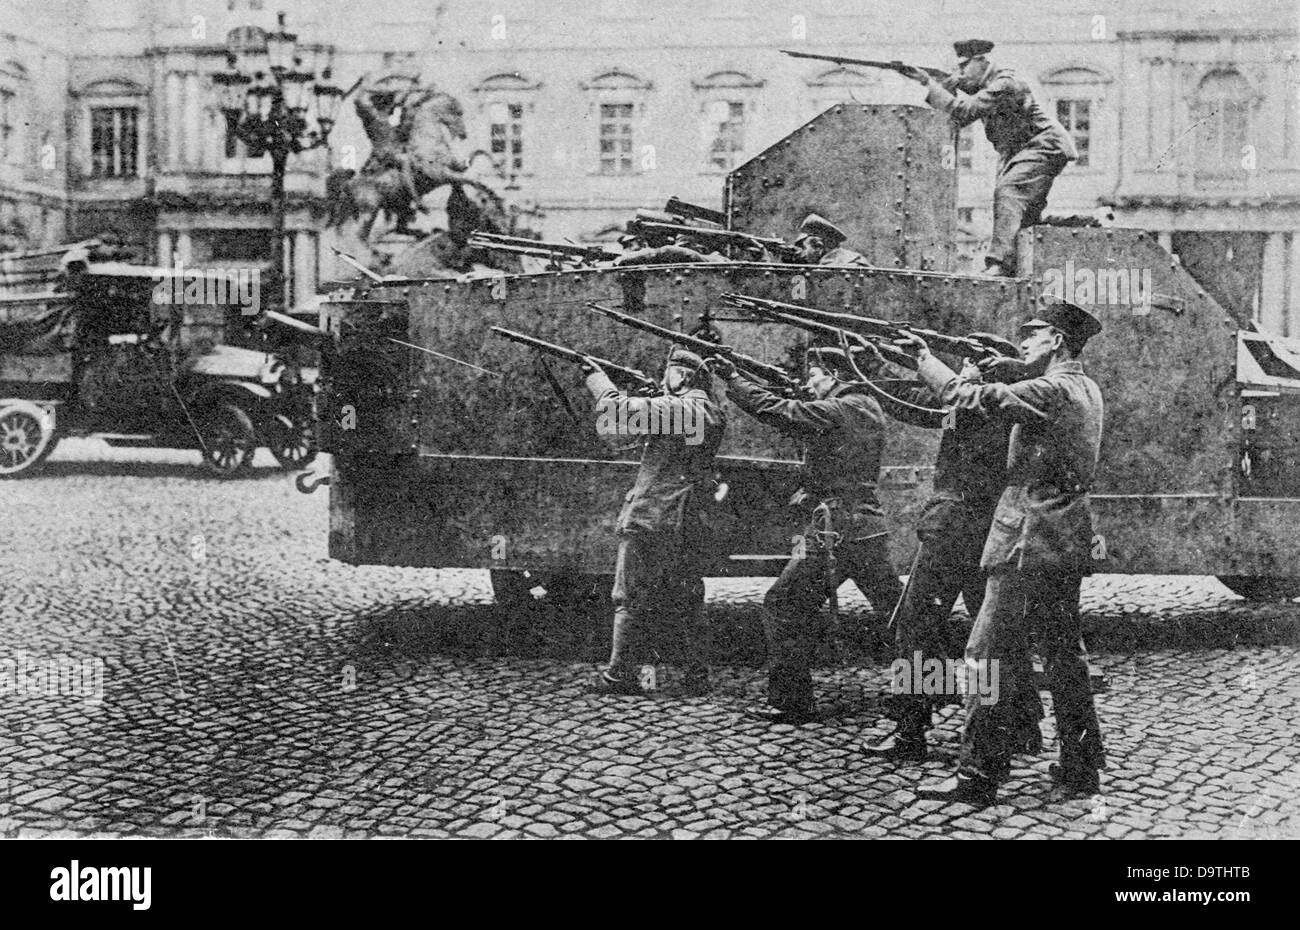 German Revolution 1918/1919: Revolutionary soldiers are pictured in an armored vehicle with weapons in the backyard of the occupied Berlin Palace in November 1918. Fotoarchiv für Zeitgeschichte Stock Photo